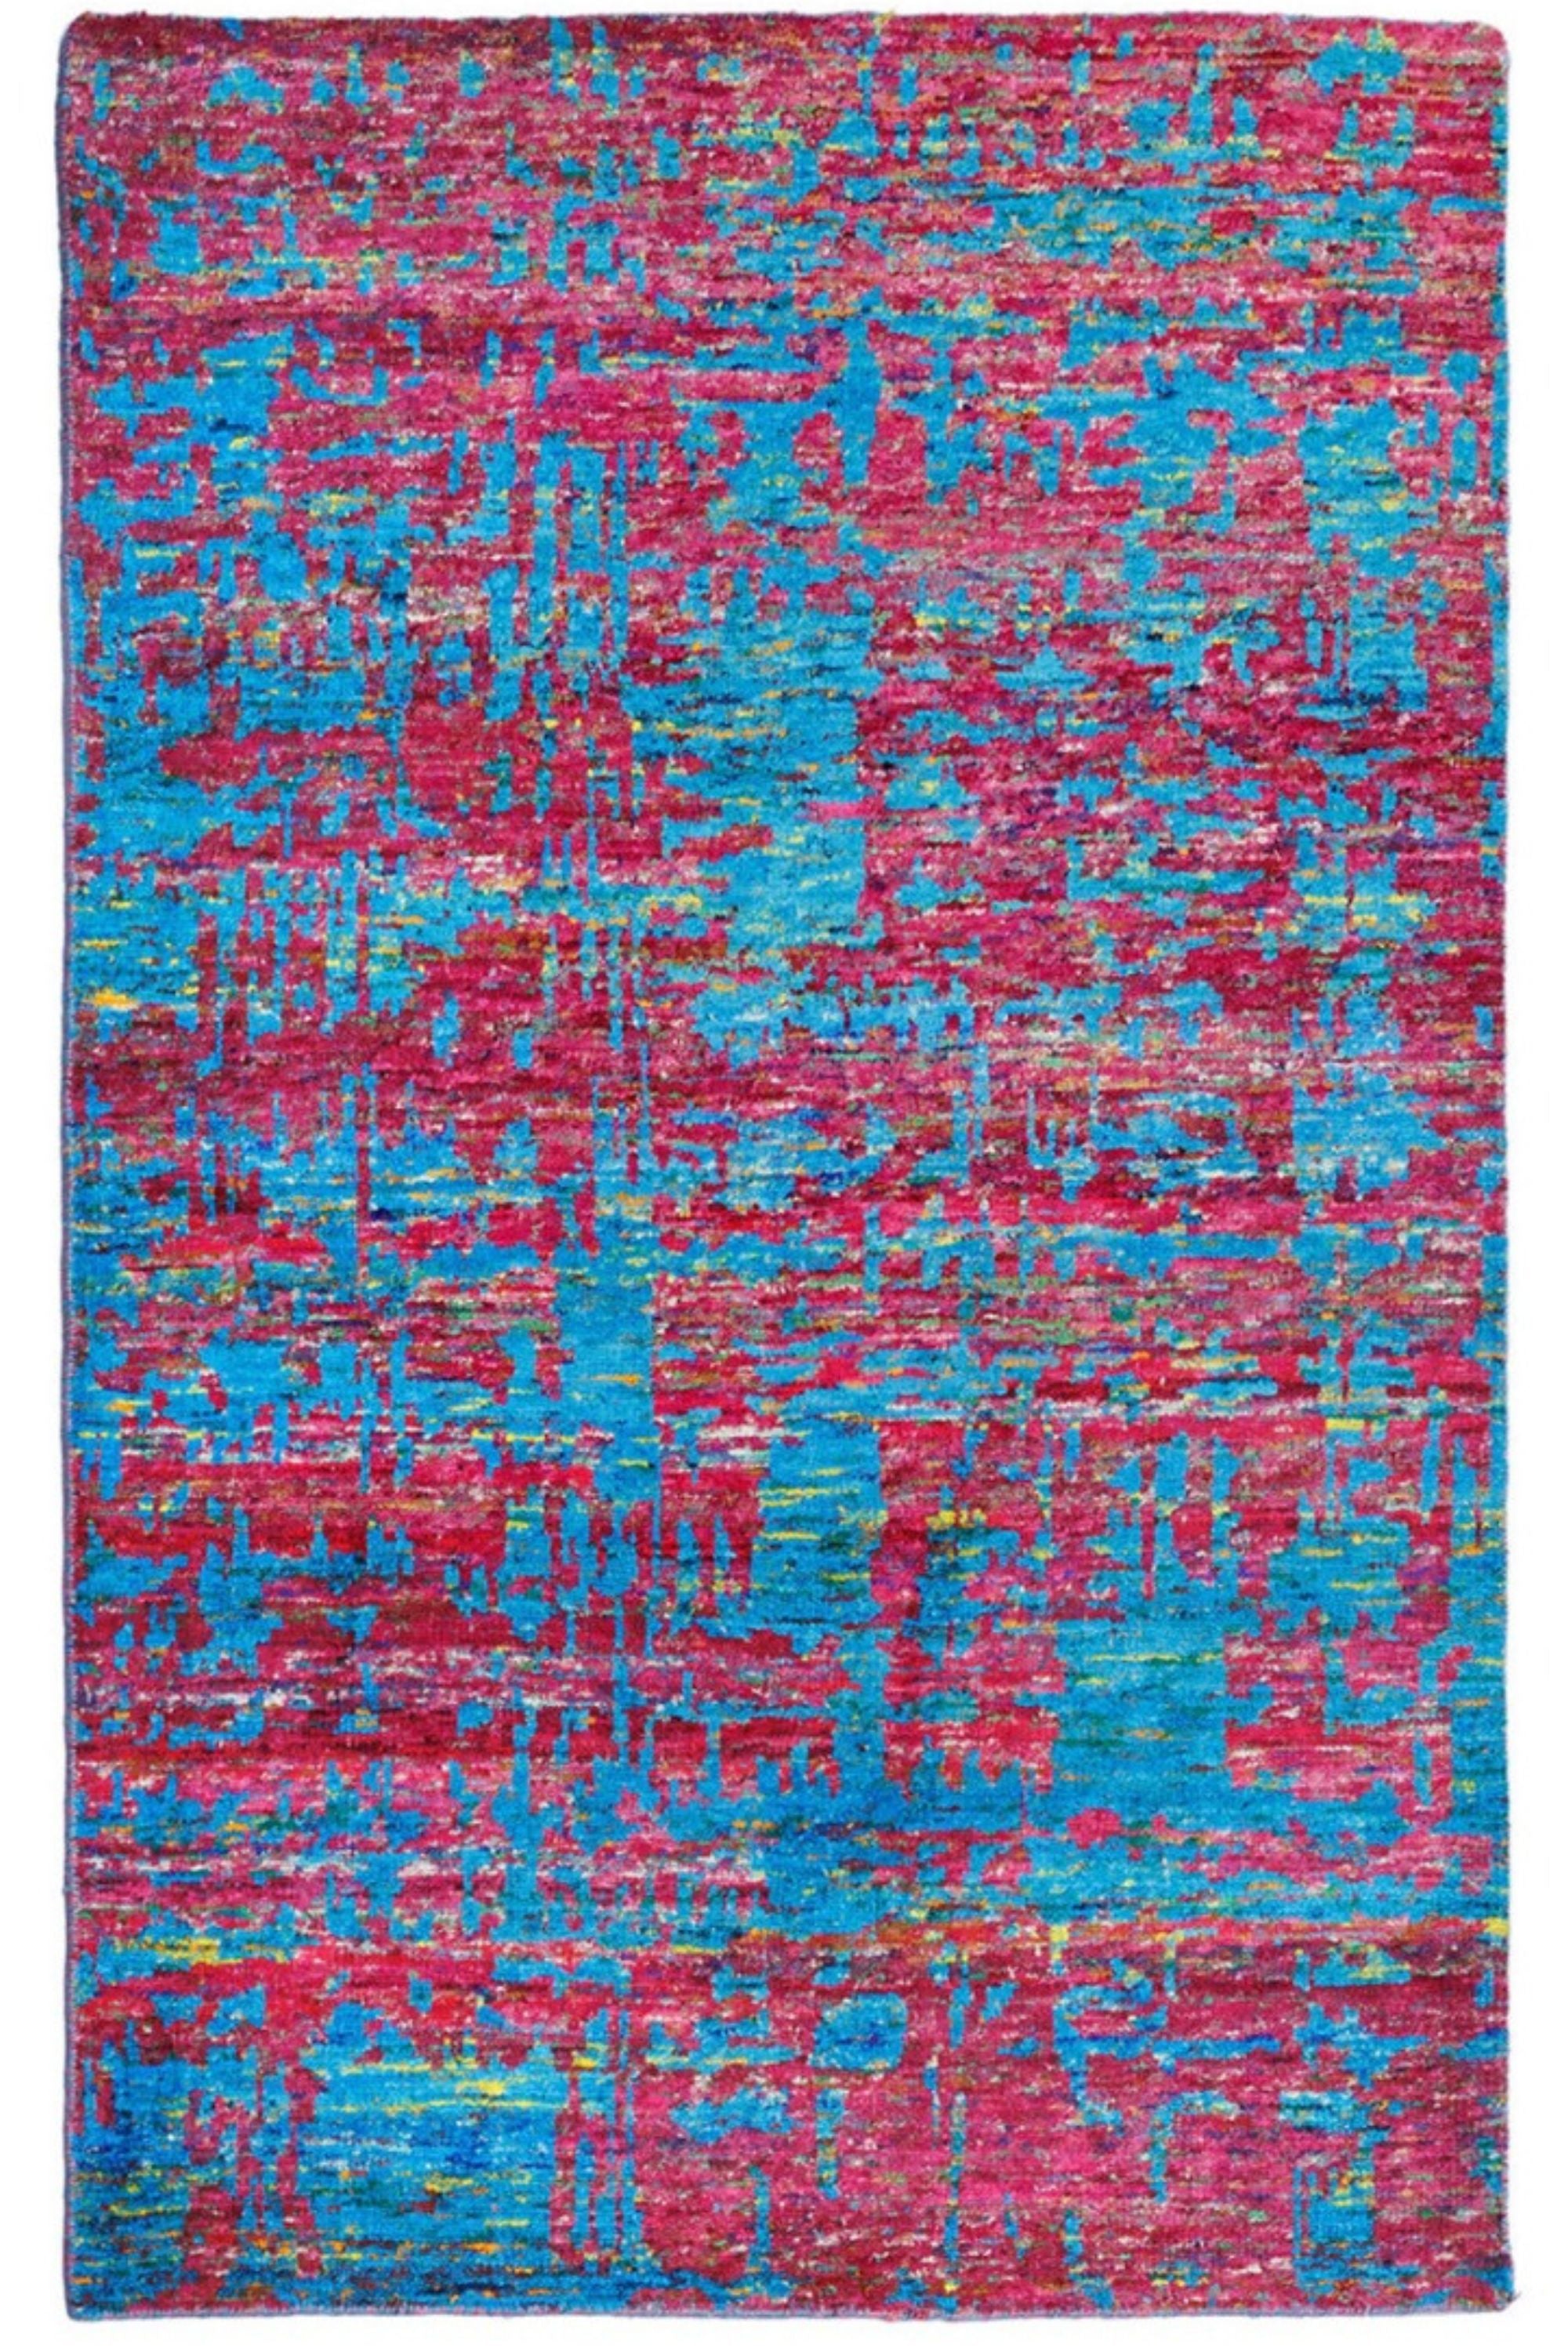 blue and pink rug woven from recycled sari silks